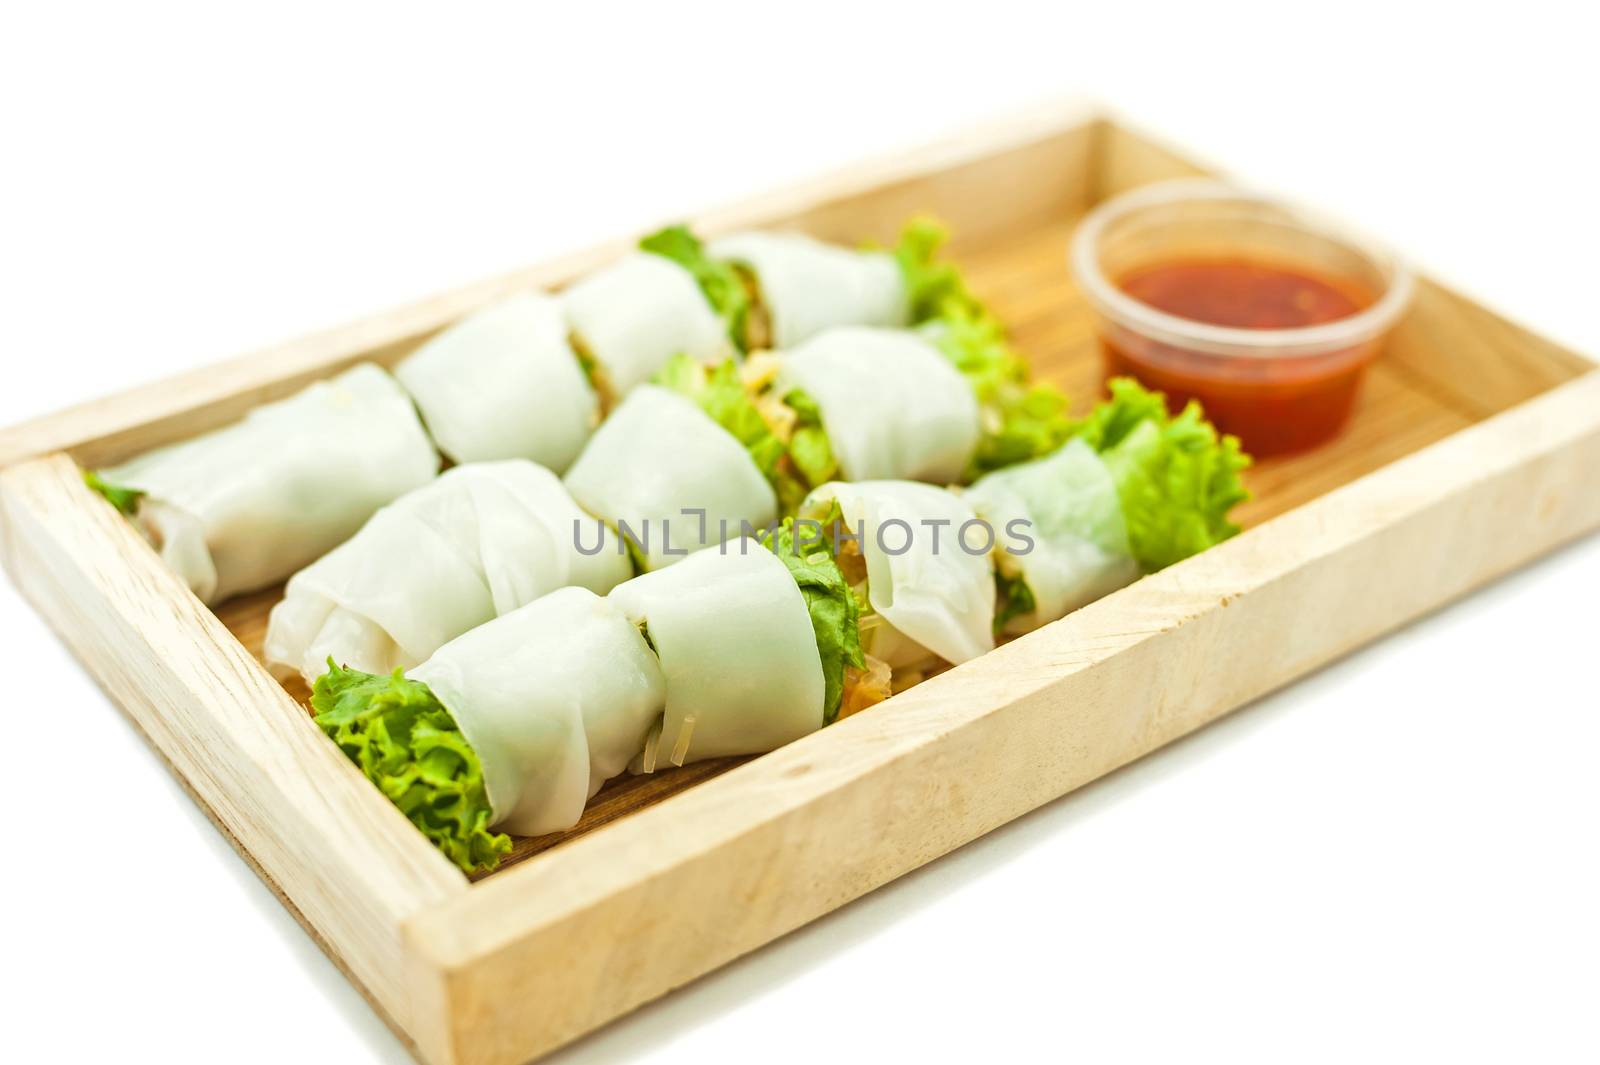 Rice paper wrapped vegetable with vermicelli noodles by jimbophoto